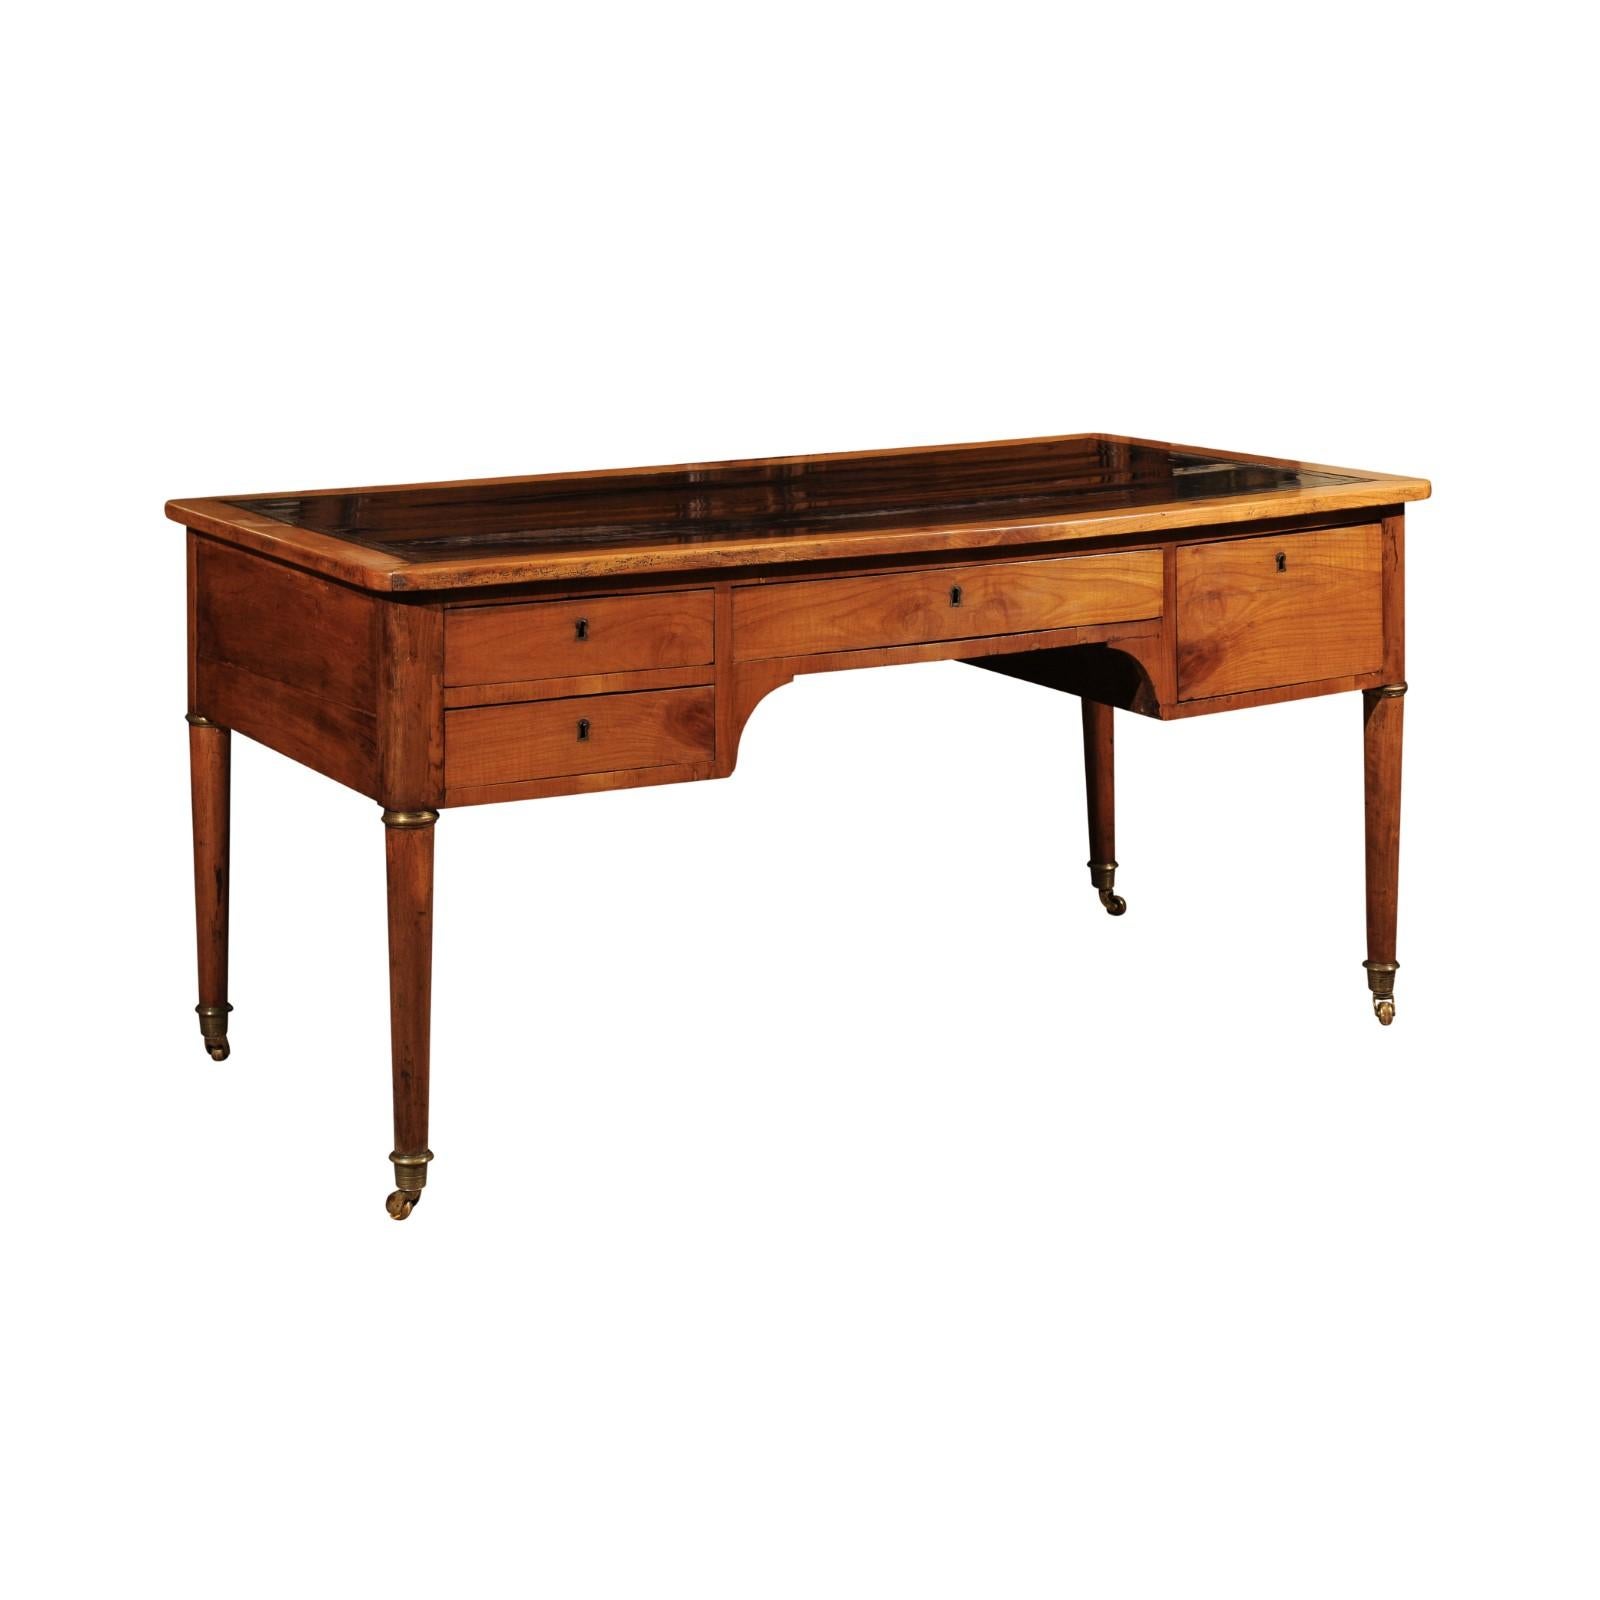 Early 19th Century French Empire Fruitwood Bureau Plat